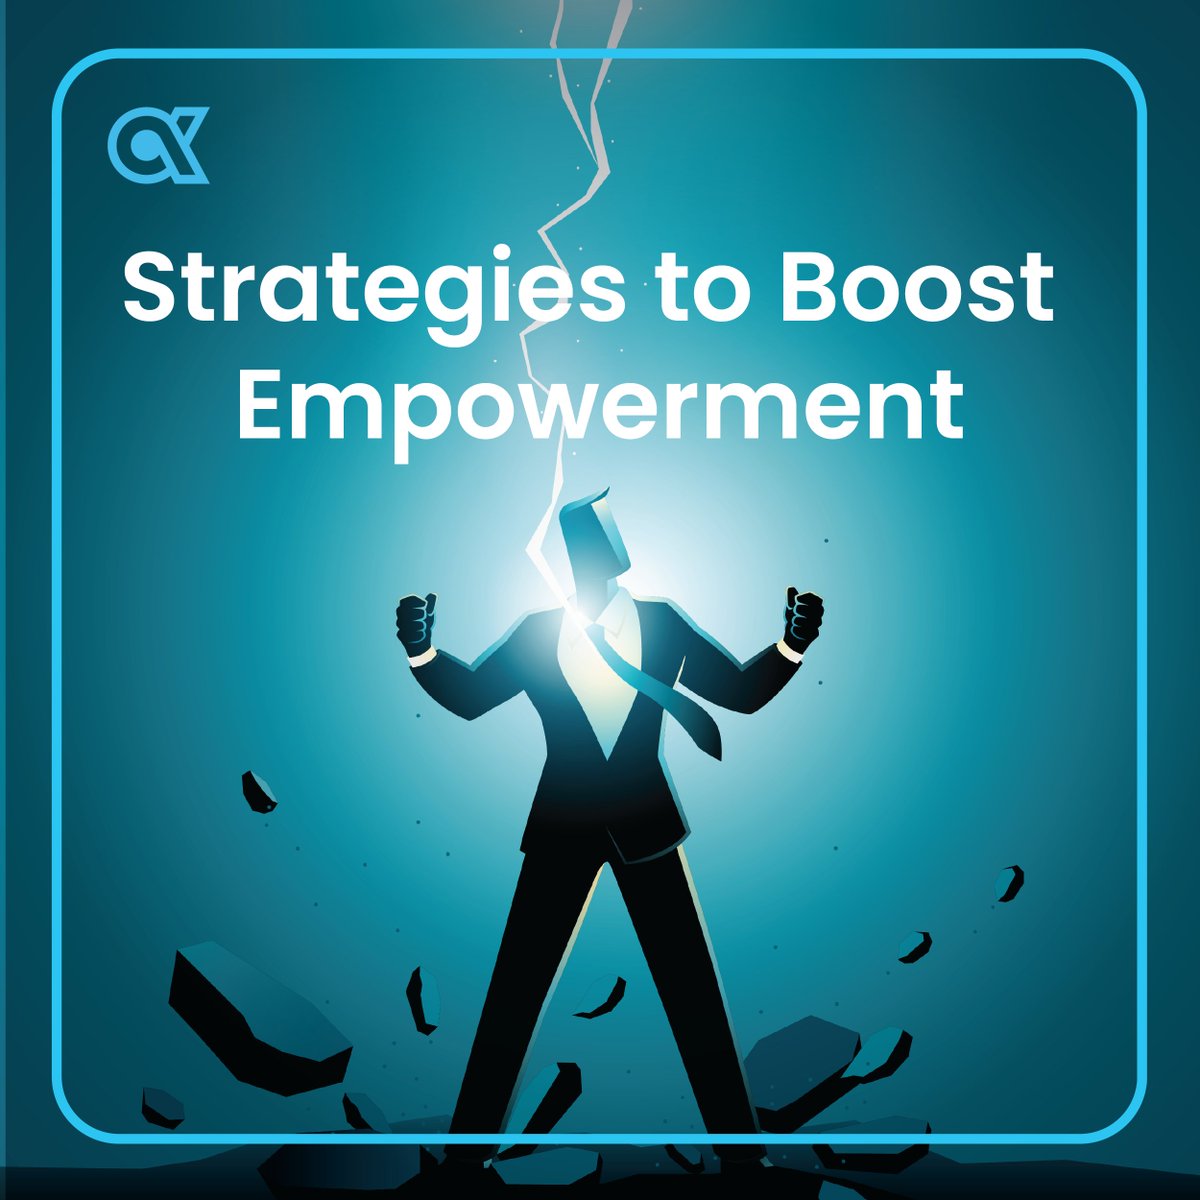 Empowerment is the opposite of micromanagement. It's providing employees with the training and resources they need and then trusting them to excel in the ways they see fit. hrmorning.com/articles/empow… #empoweremployees #employeeengagement #leadership